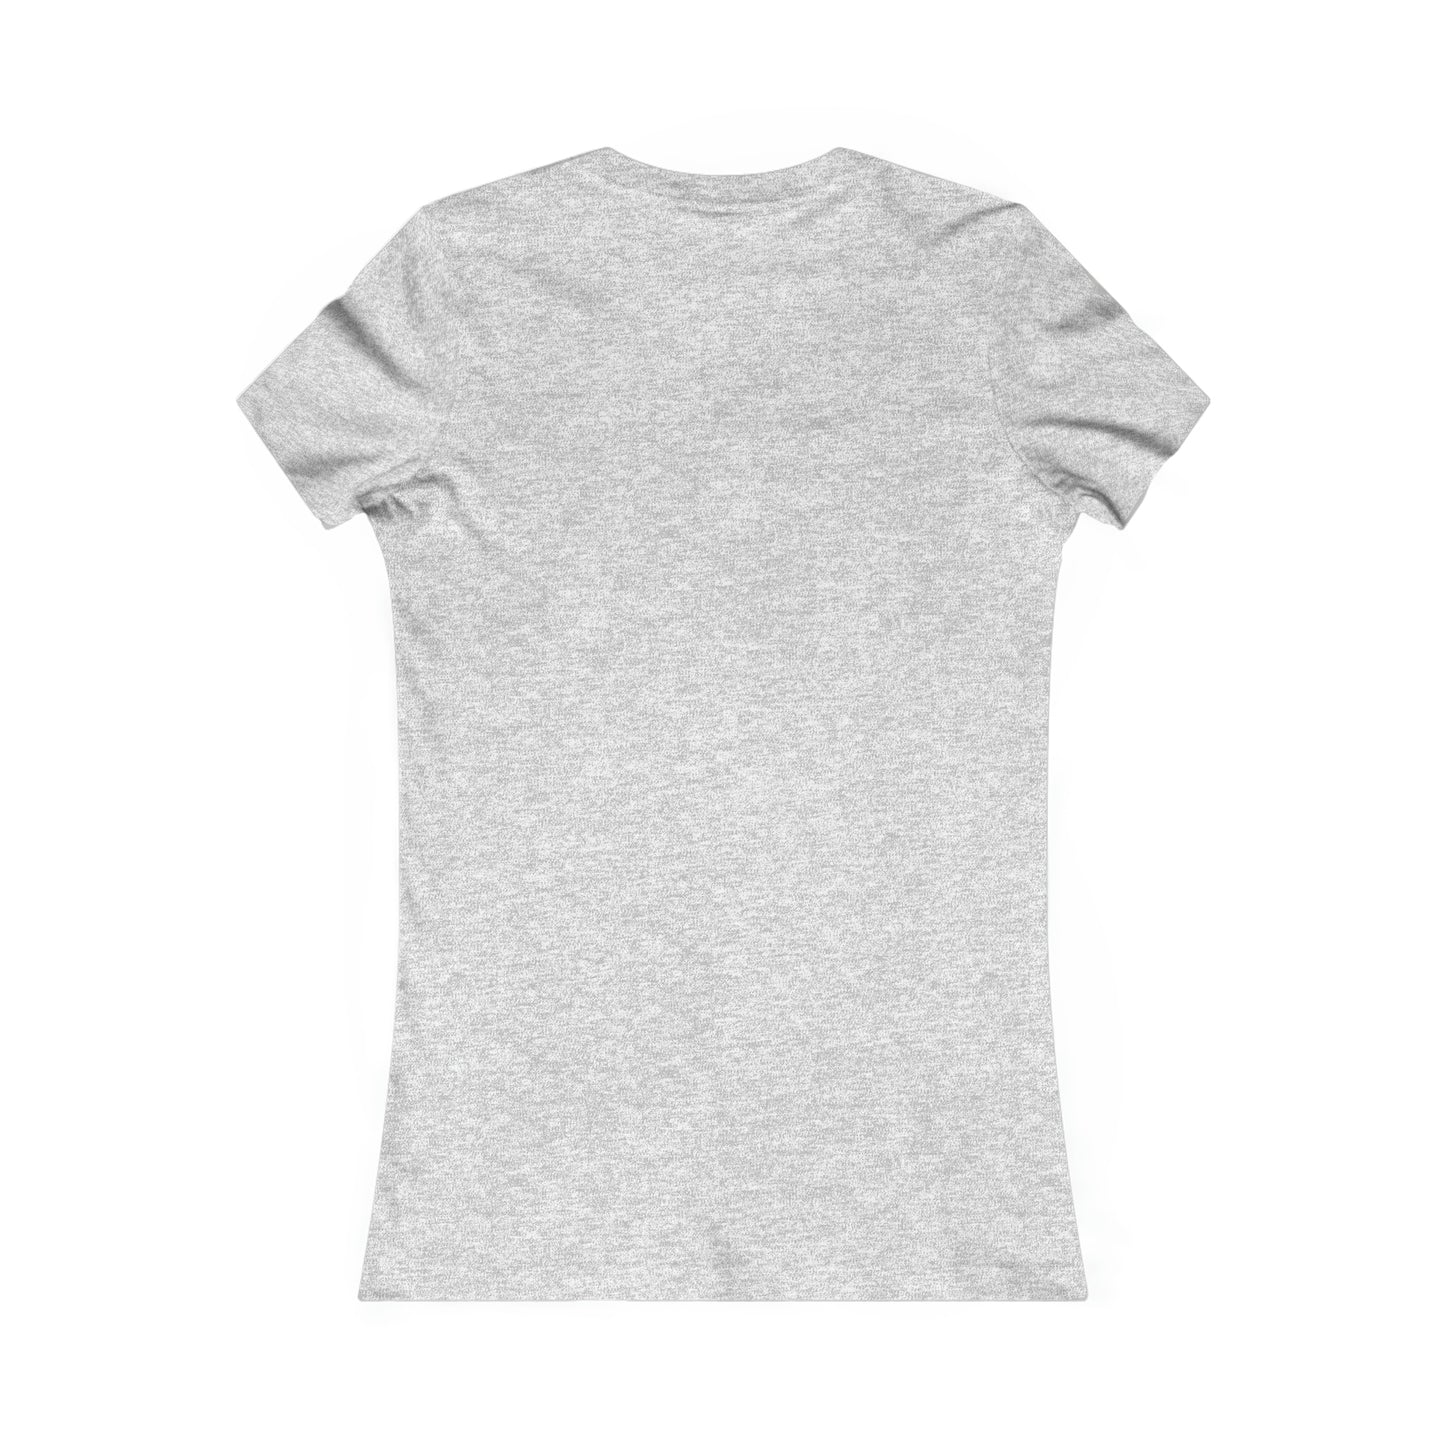 "Lebron from P.R." - Women's Tee